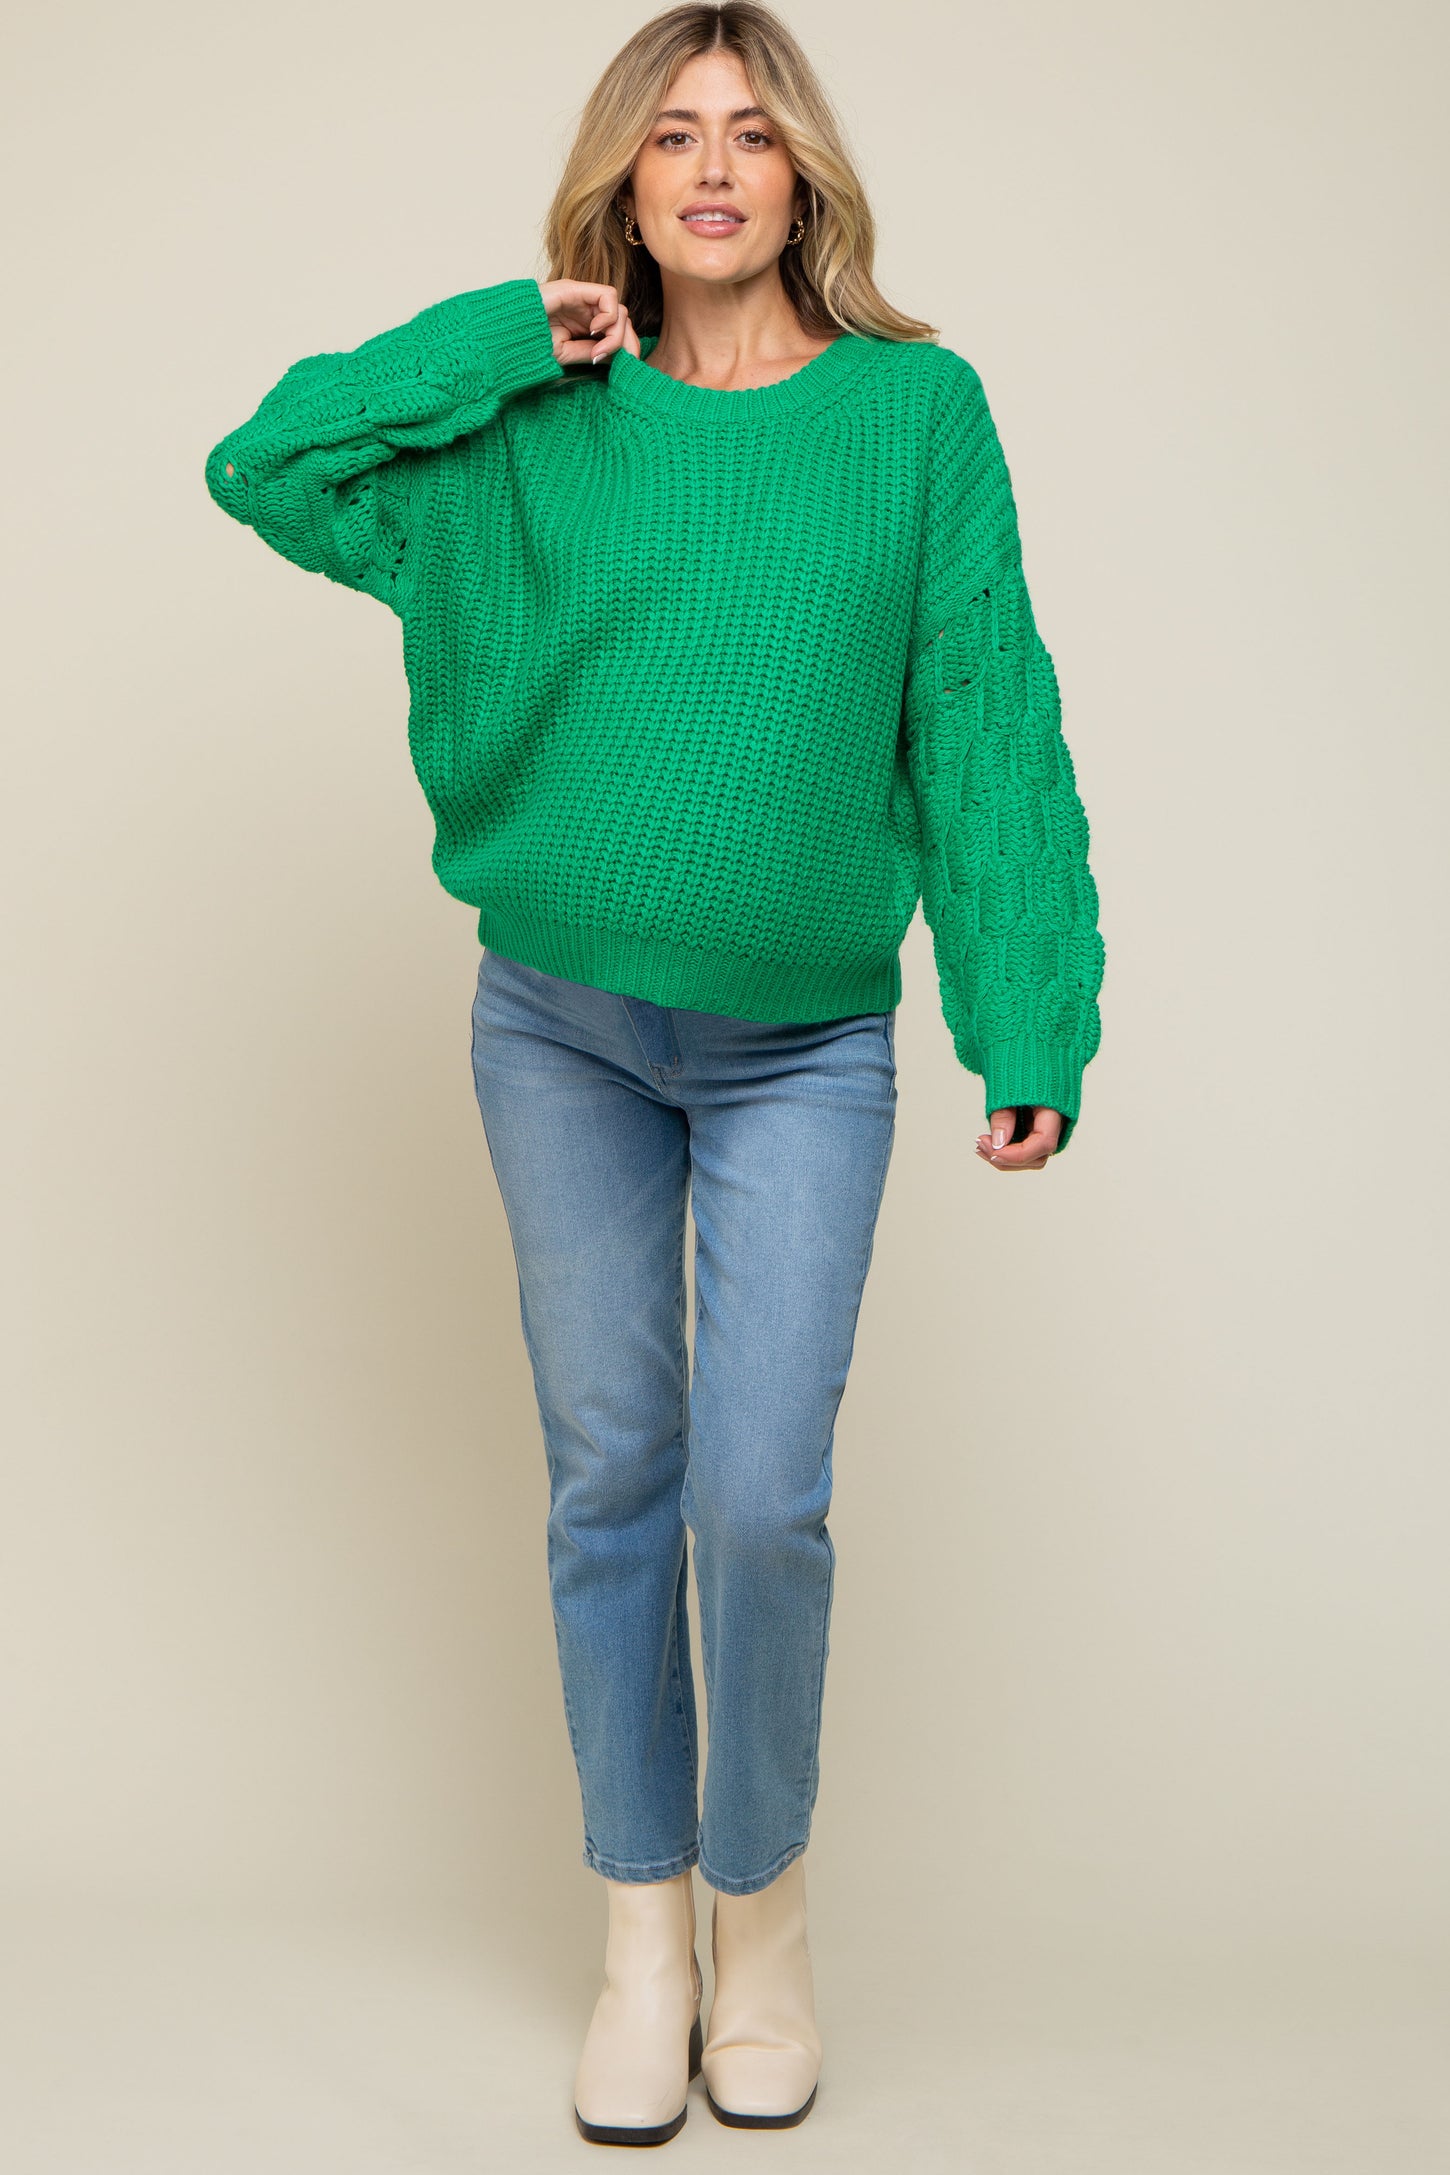 Green Cable Knit Sleeve Maternity Sweater– PinkBlush